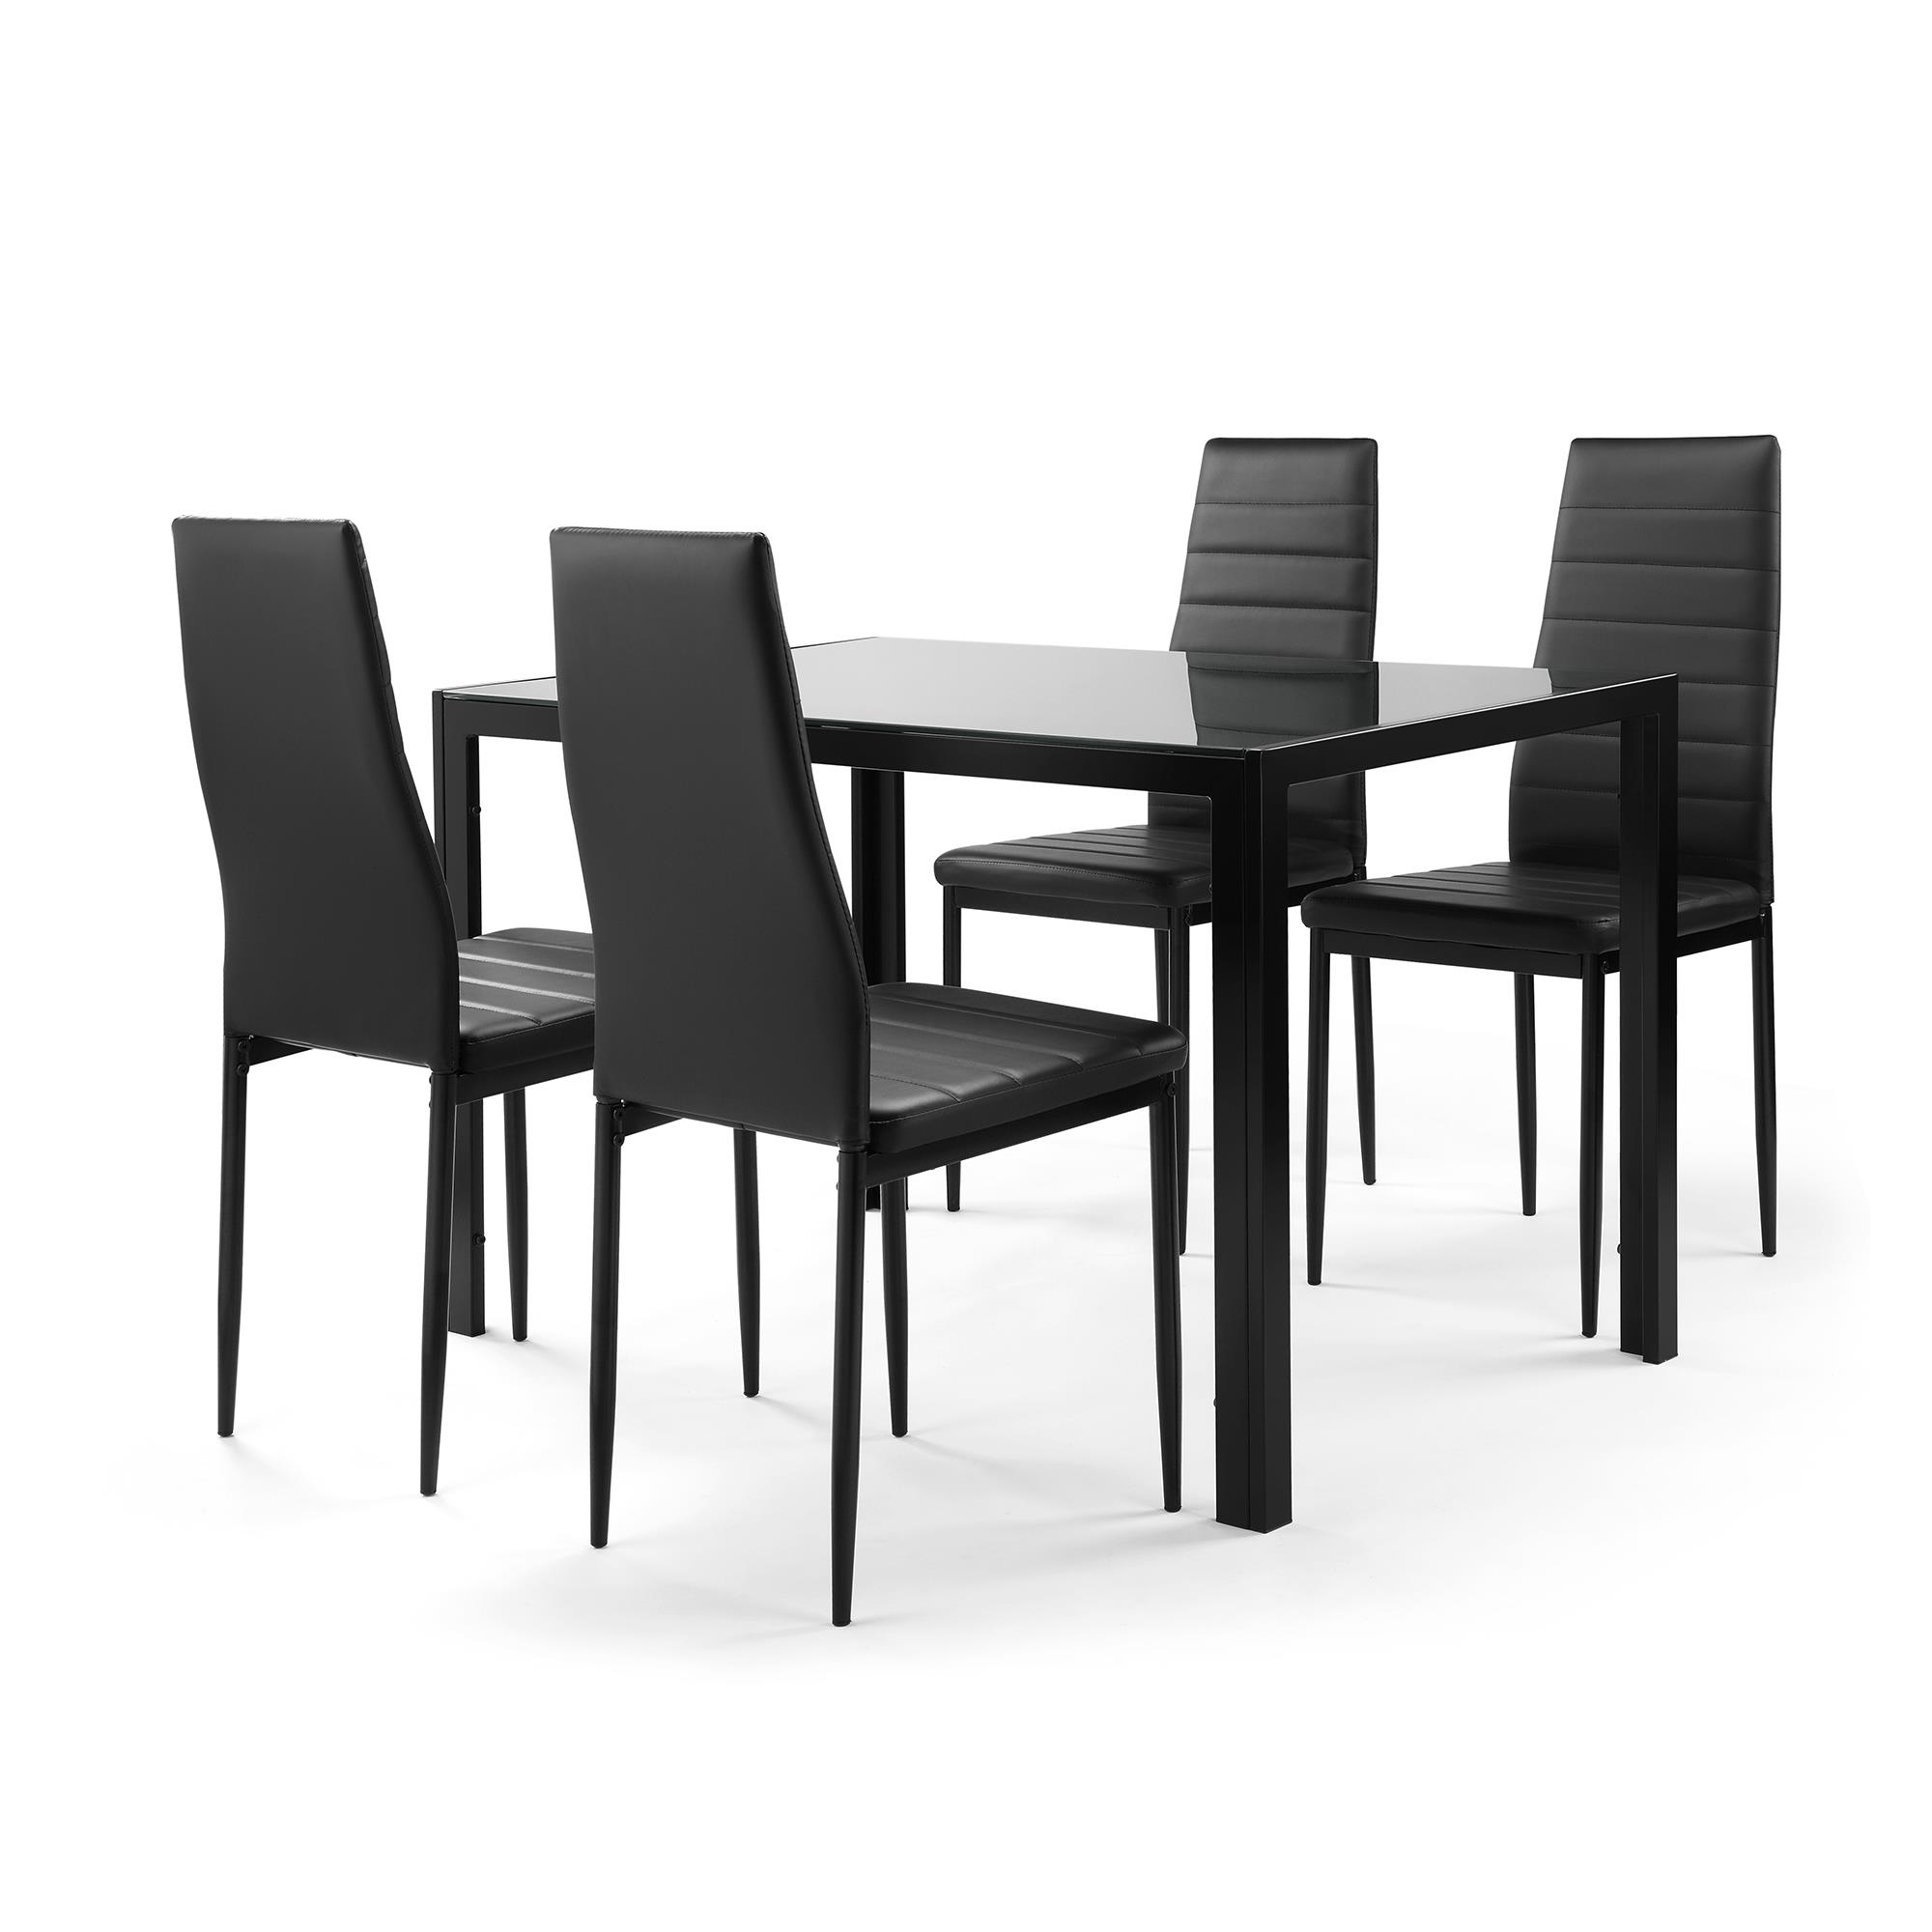 Zimtown Dining Table Set, 5 Piece Kitchen Table Set with Glass Table Top 4 Leather Chairs Dinette (Black) - image 2 of 11